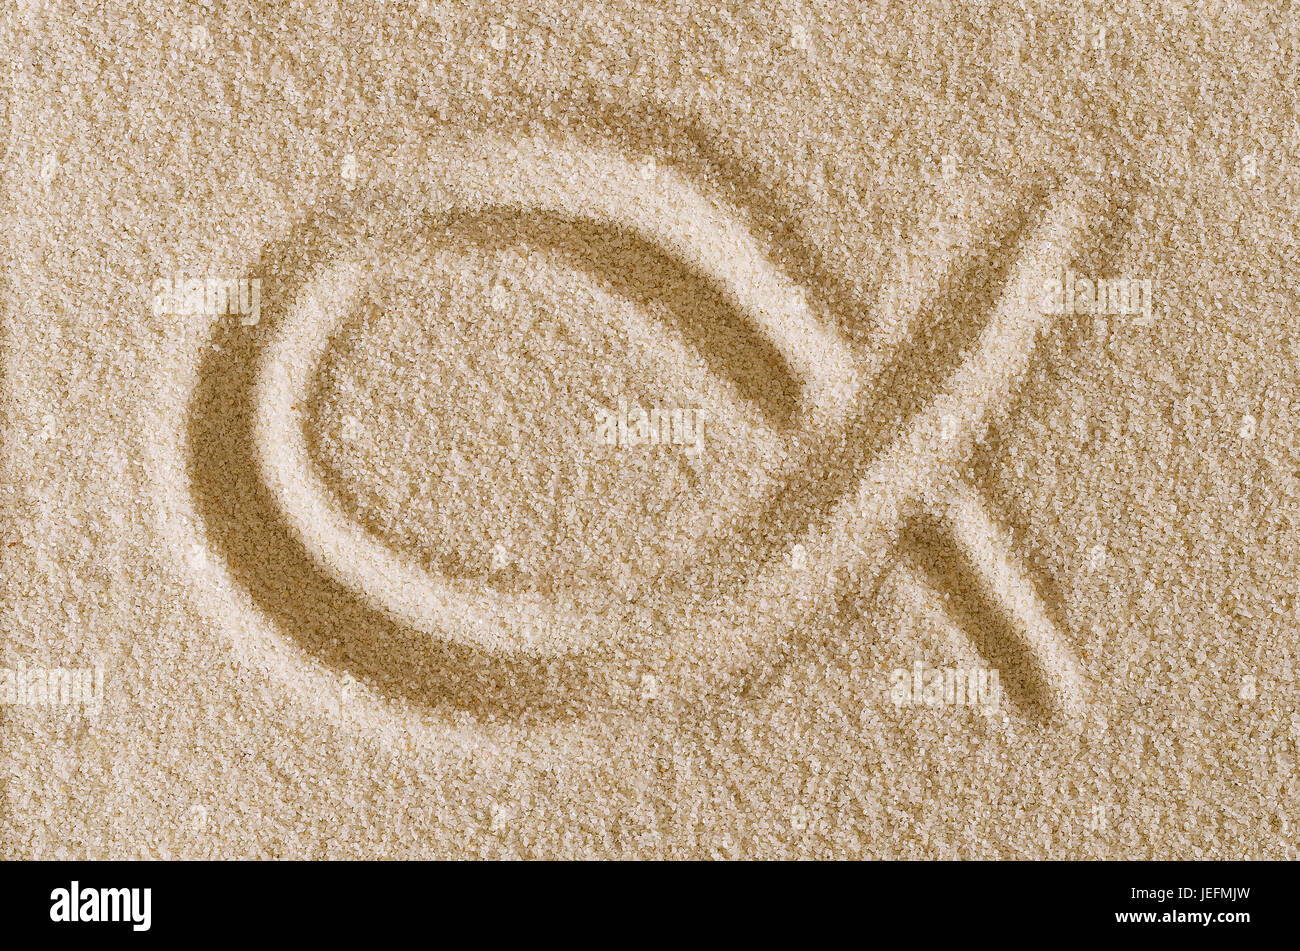 Jesus Fish symbol, drawn in sand. Imprint and shape of the ichthys, also ichthus, in ocher grains of sand. The sign consists of two intersecting arcs. Stock Photo